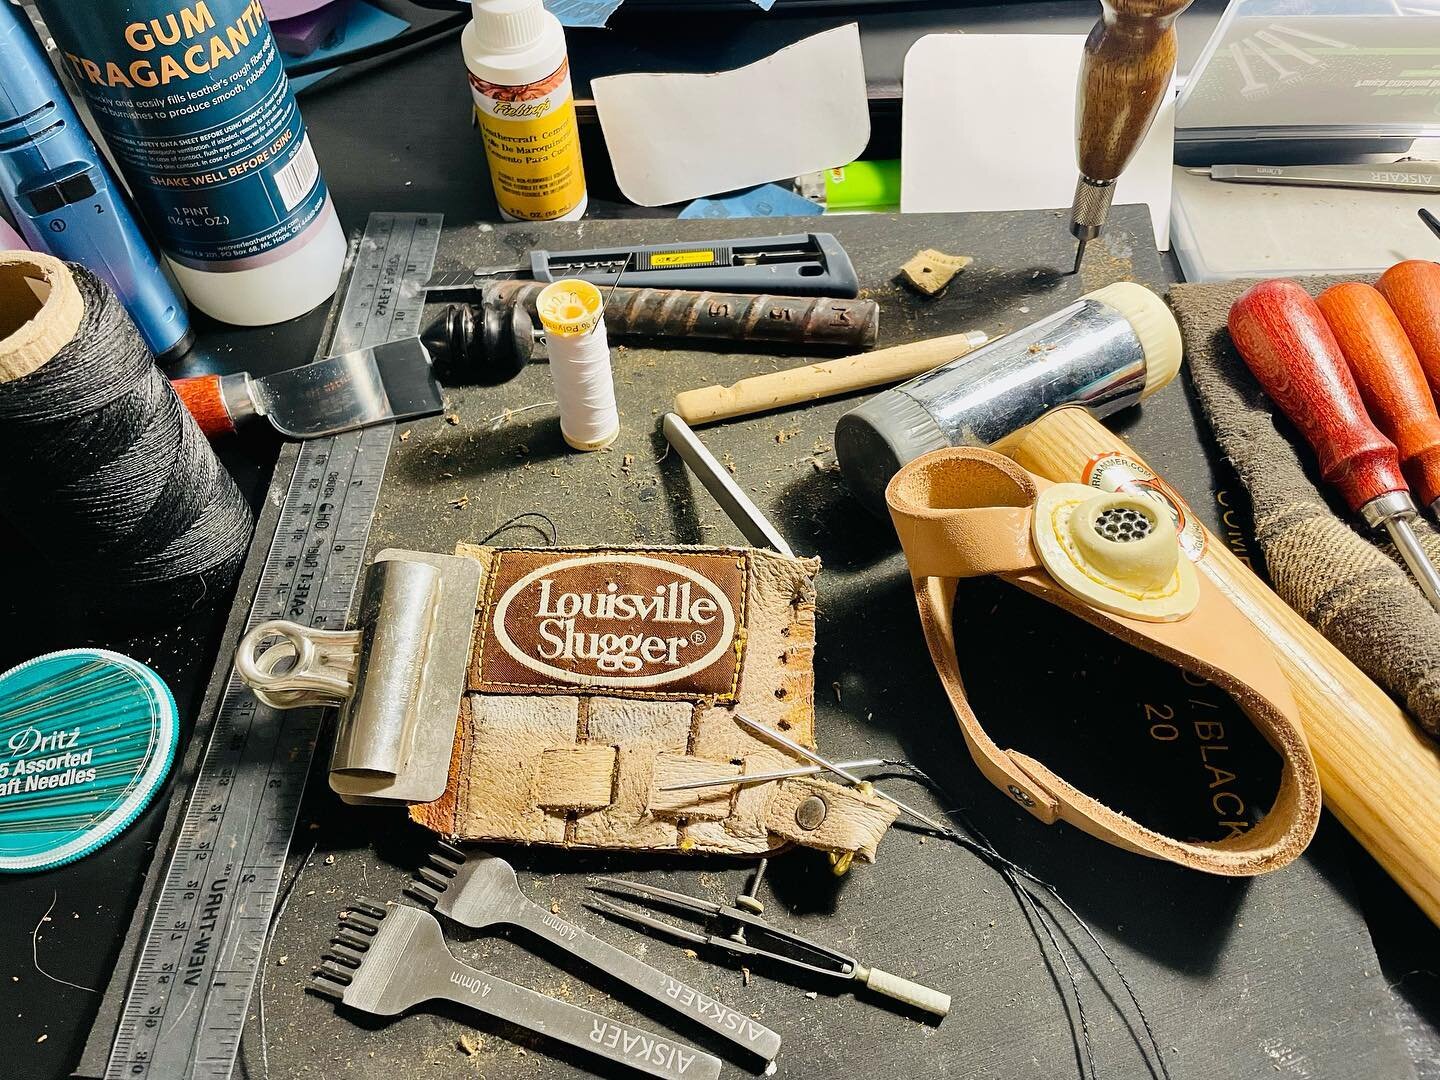 Ready to start stitching the Louisville Slugger baseball glove wallet, but I&rsquo;m constantly distracted by the puppy. #leatherwork #leatherworking #leatherwallet #baseballglovewallet #goldenretriever #goldenretrieversofinstagram #leathercommission